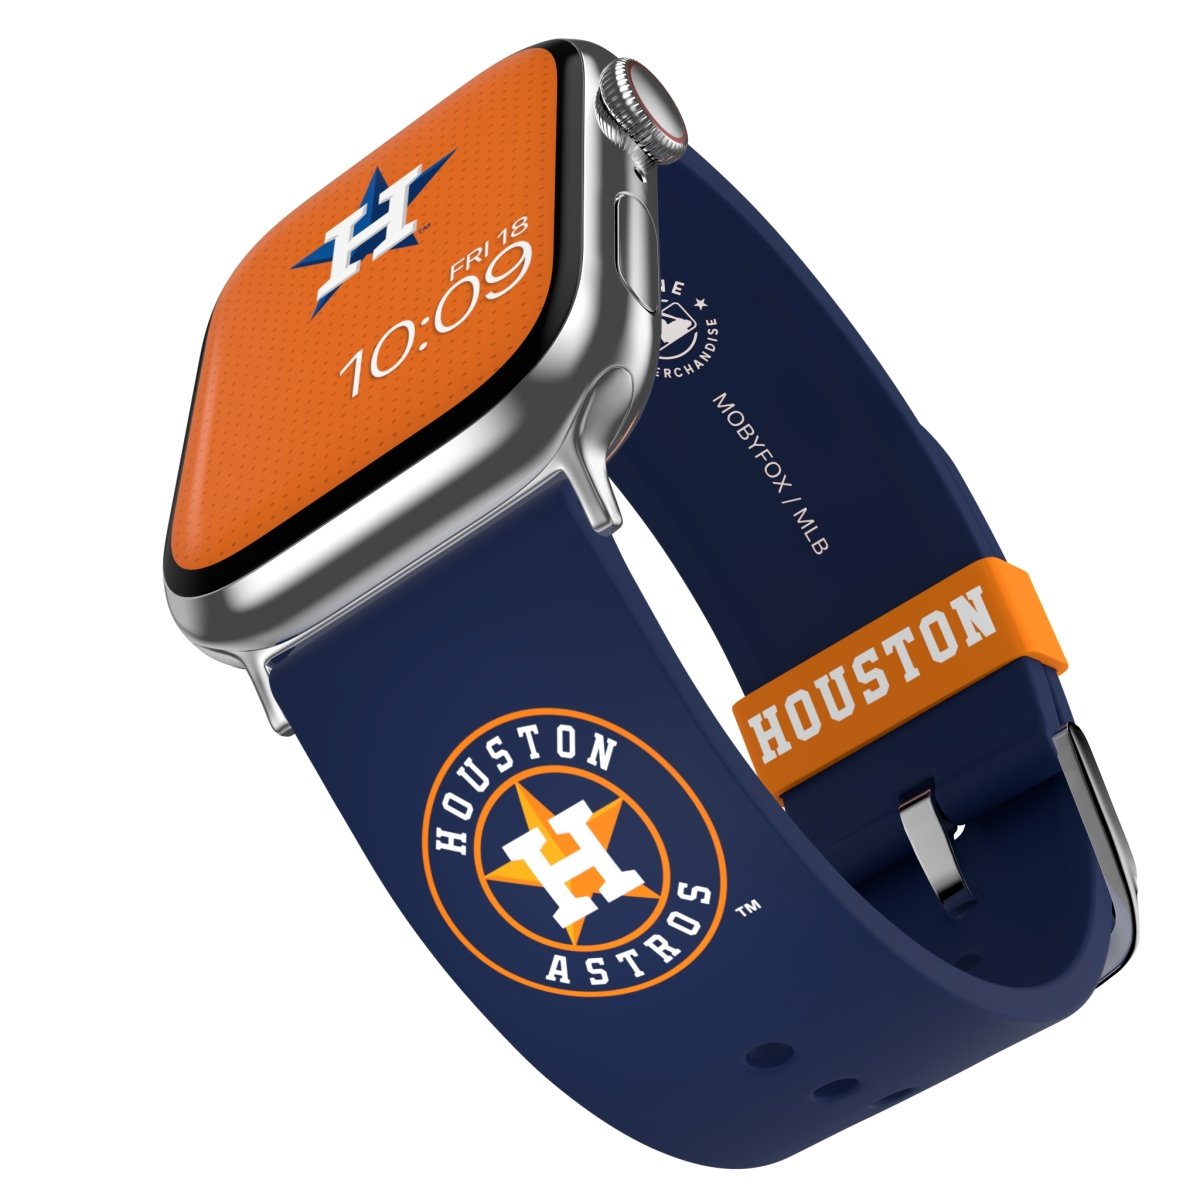 MLB - Houston Astros Apple Watch Band | Officially Licensed | MobyFox